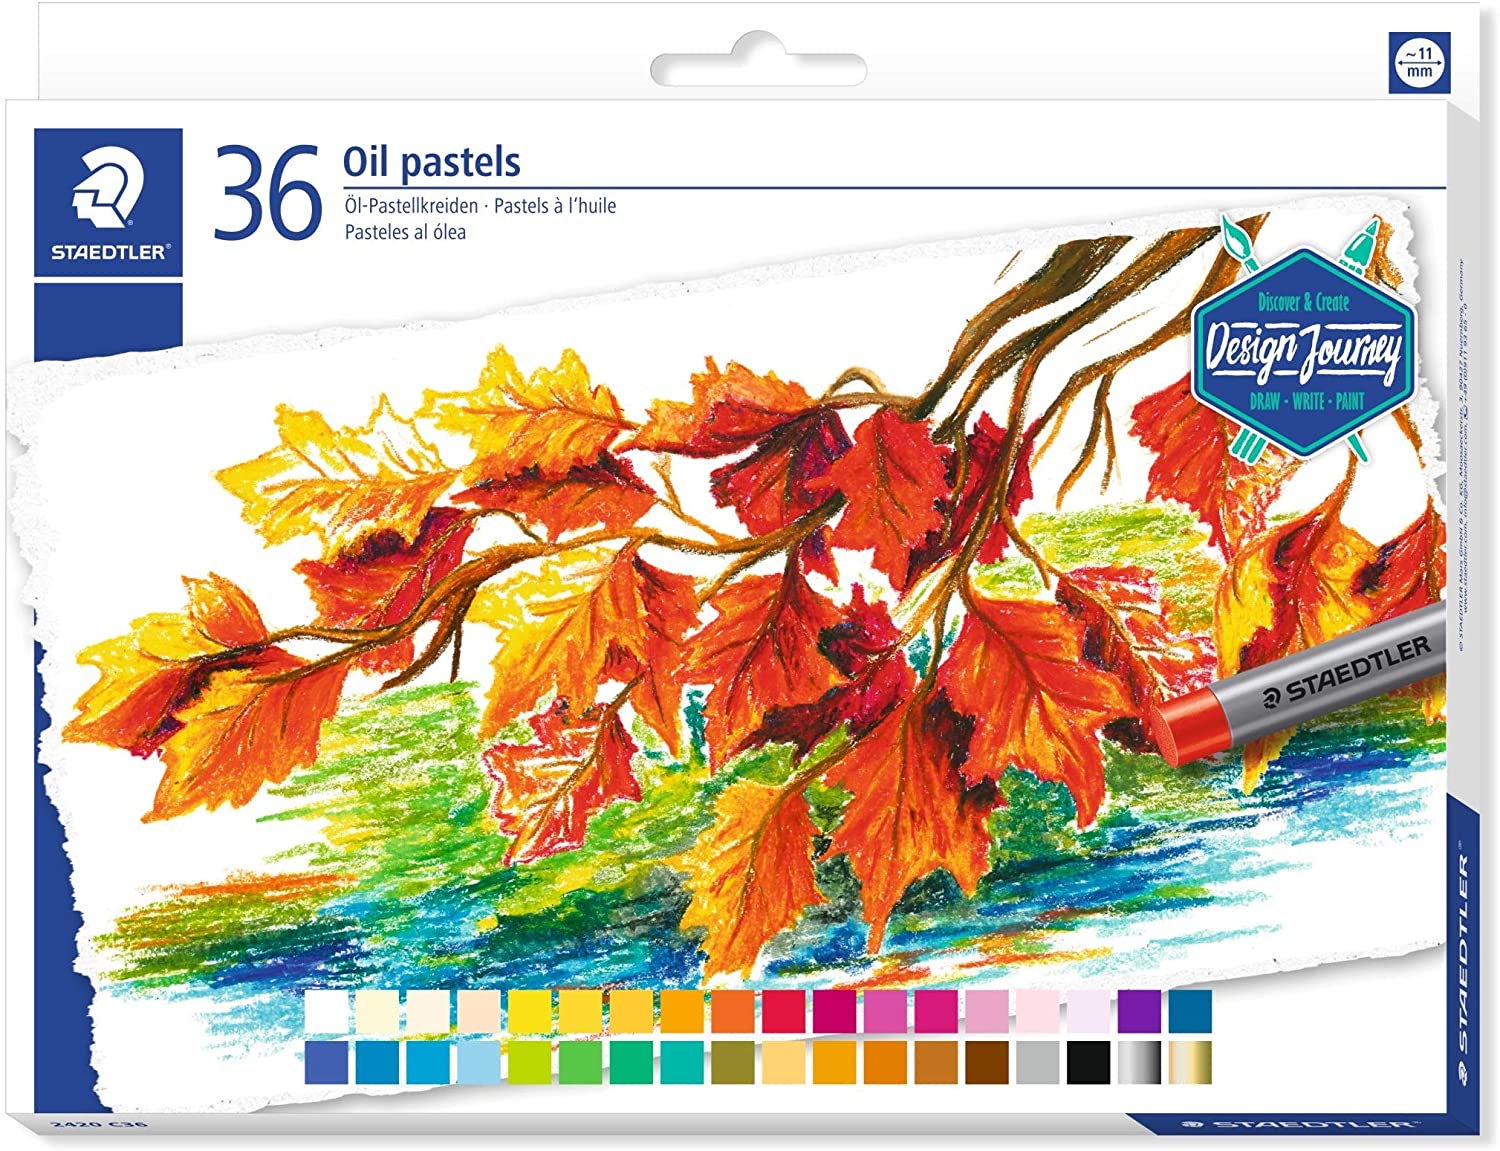  Staedtler Oil Pastels 36 Couleurs Lumineuses